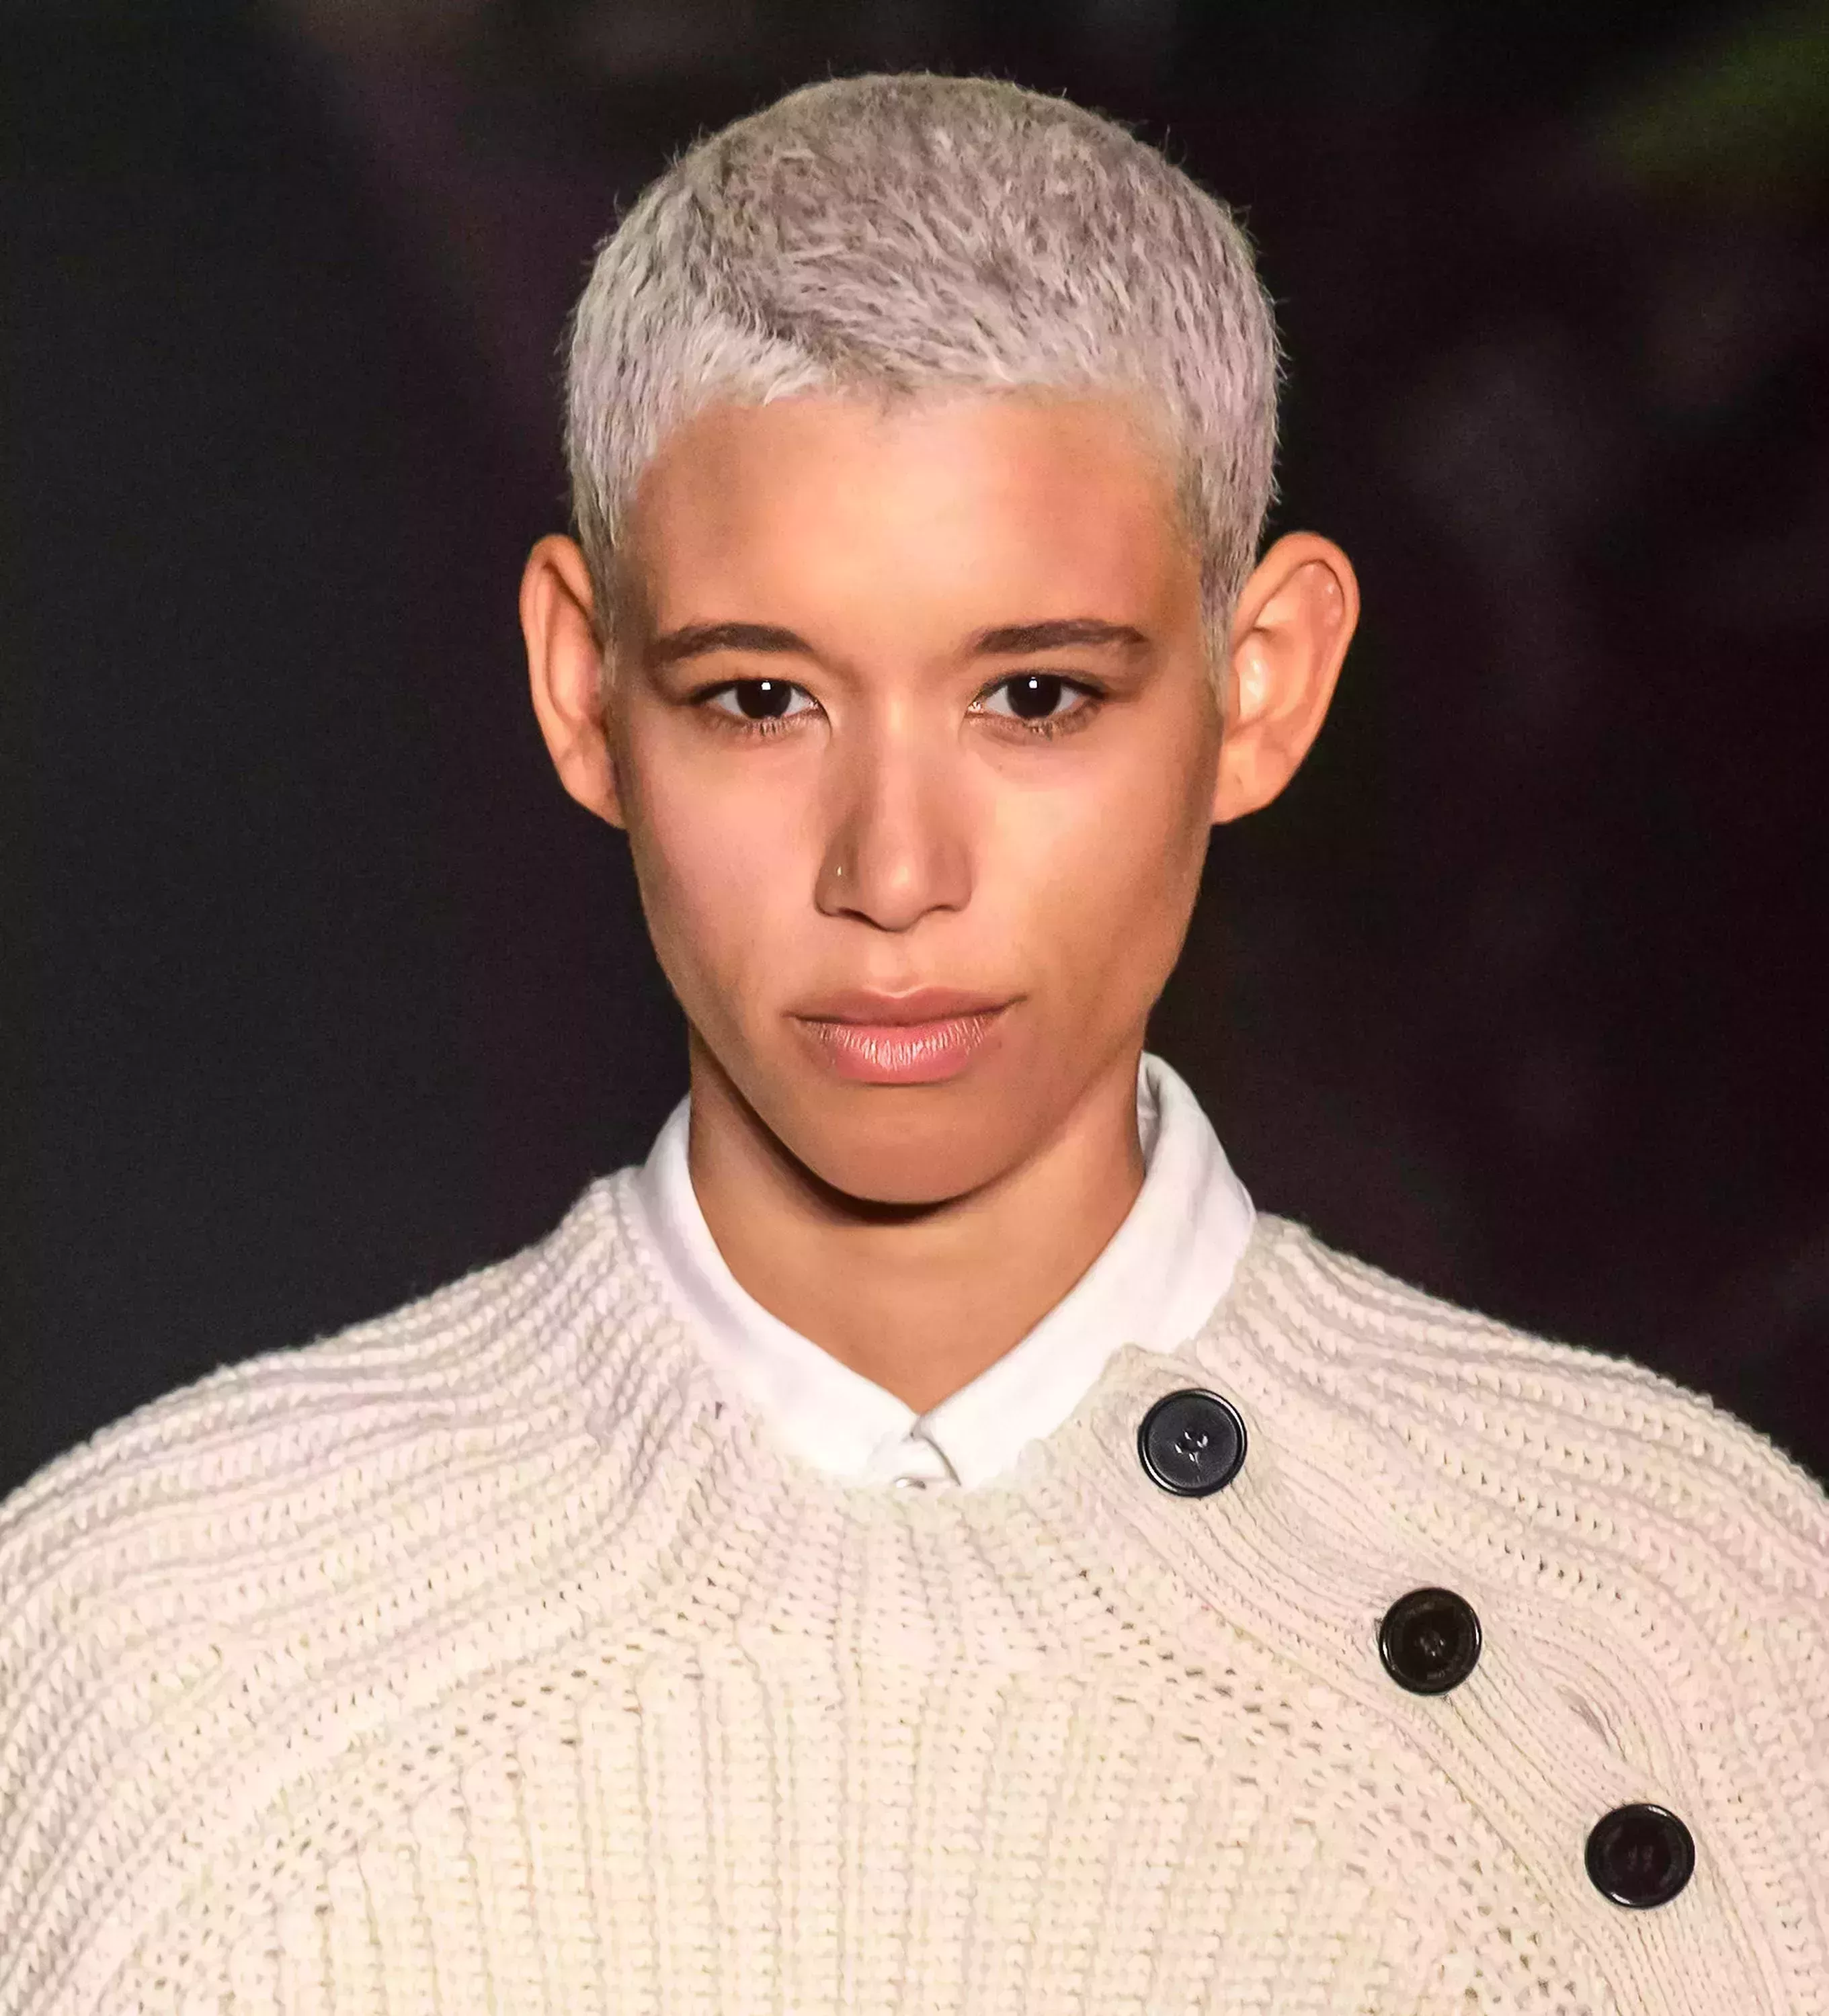 Dilone’s Silver and Gray Buzz Cut